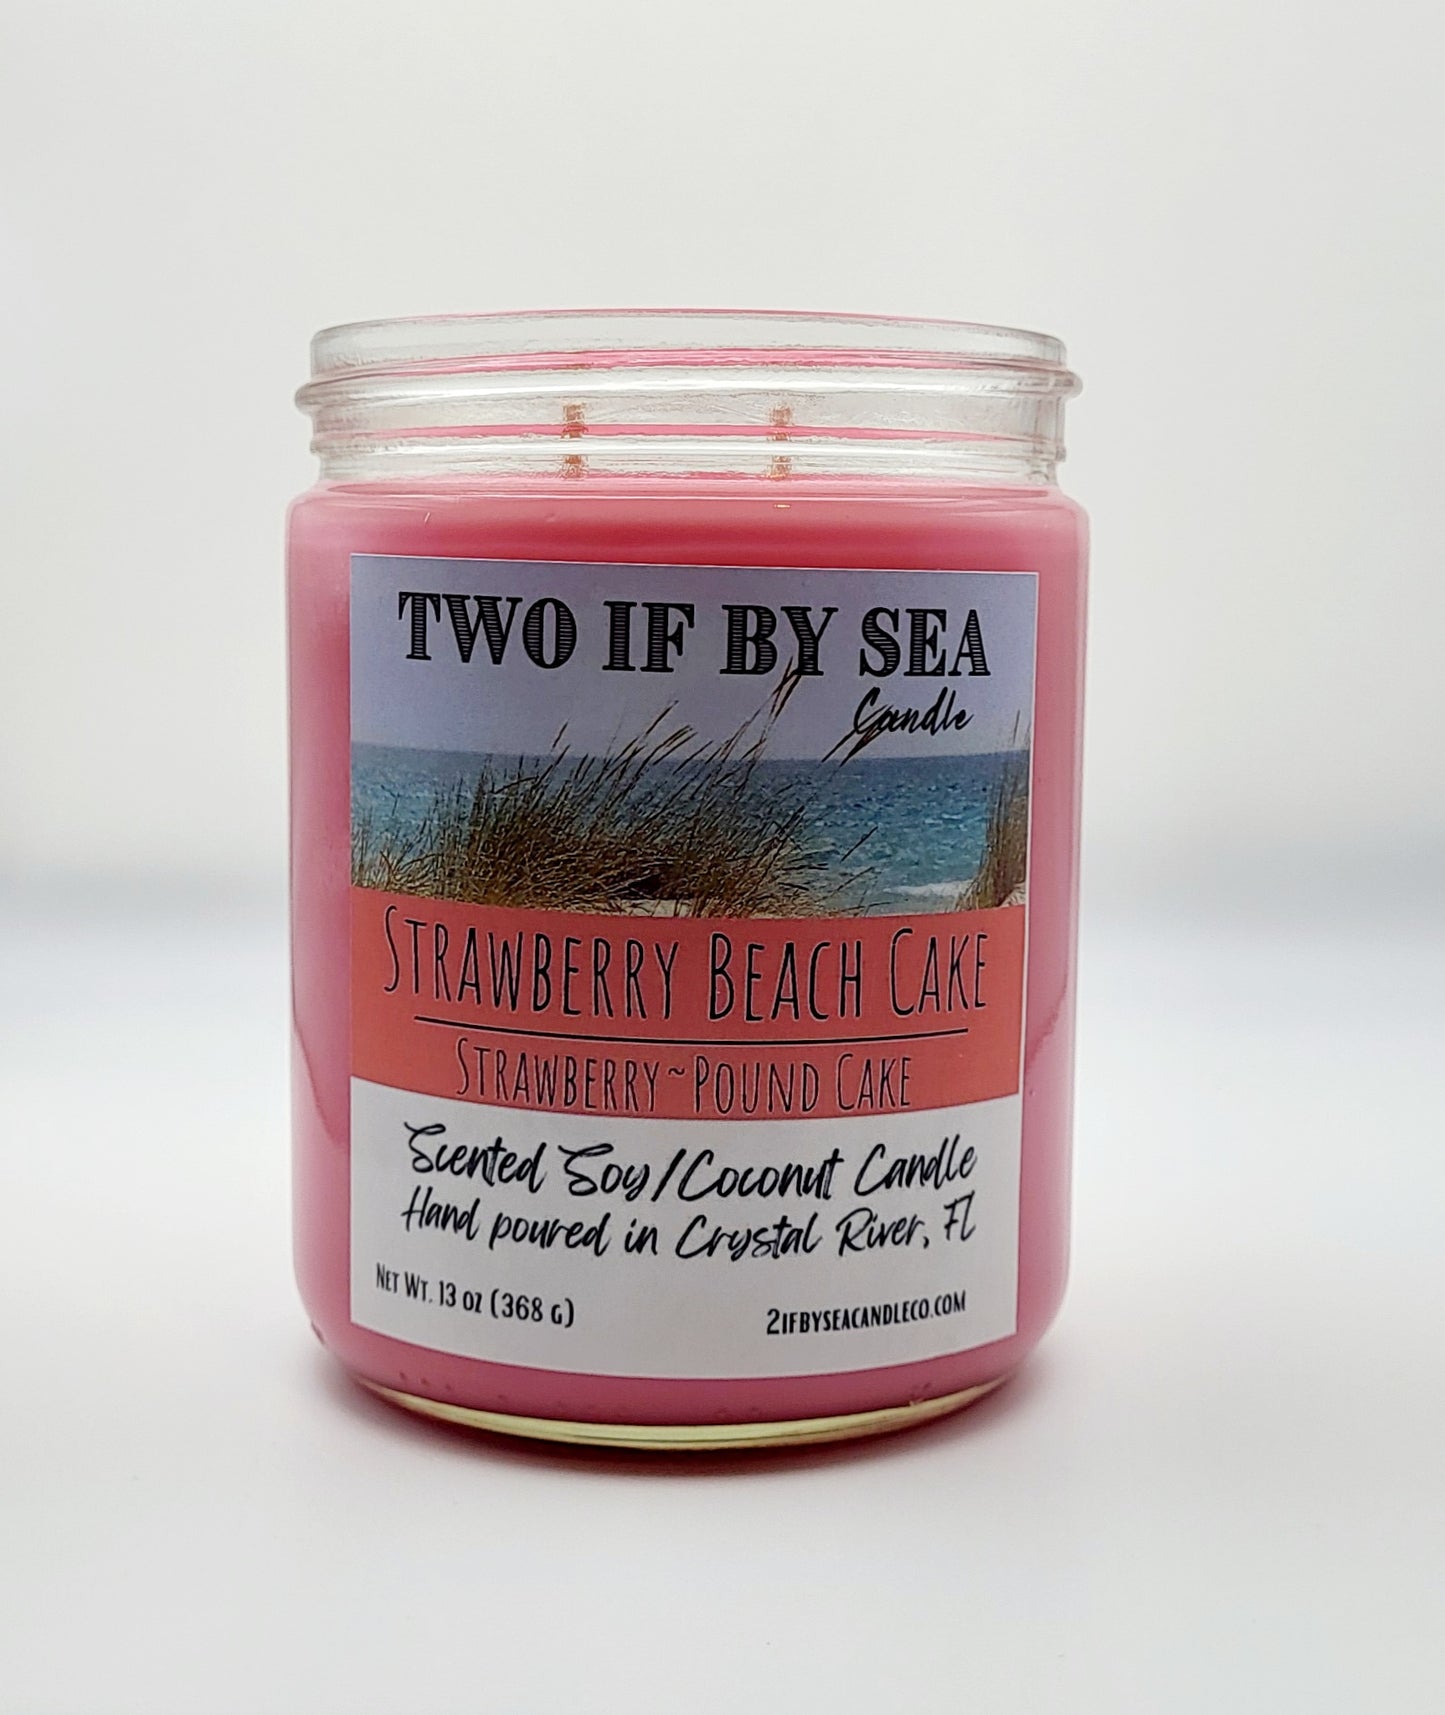 Strawberry Beach Cake Scented Soy/Coconut Candle